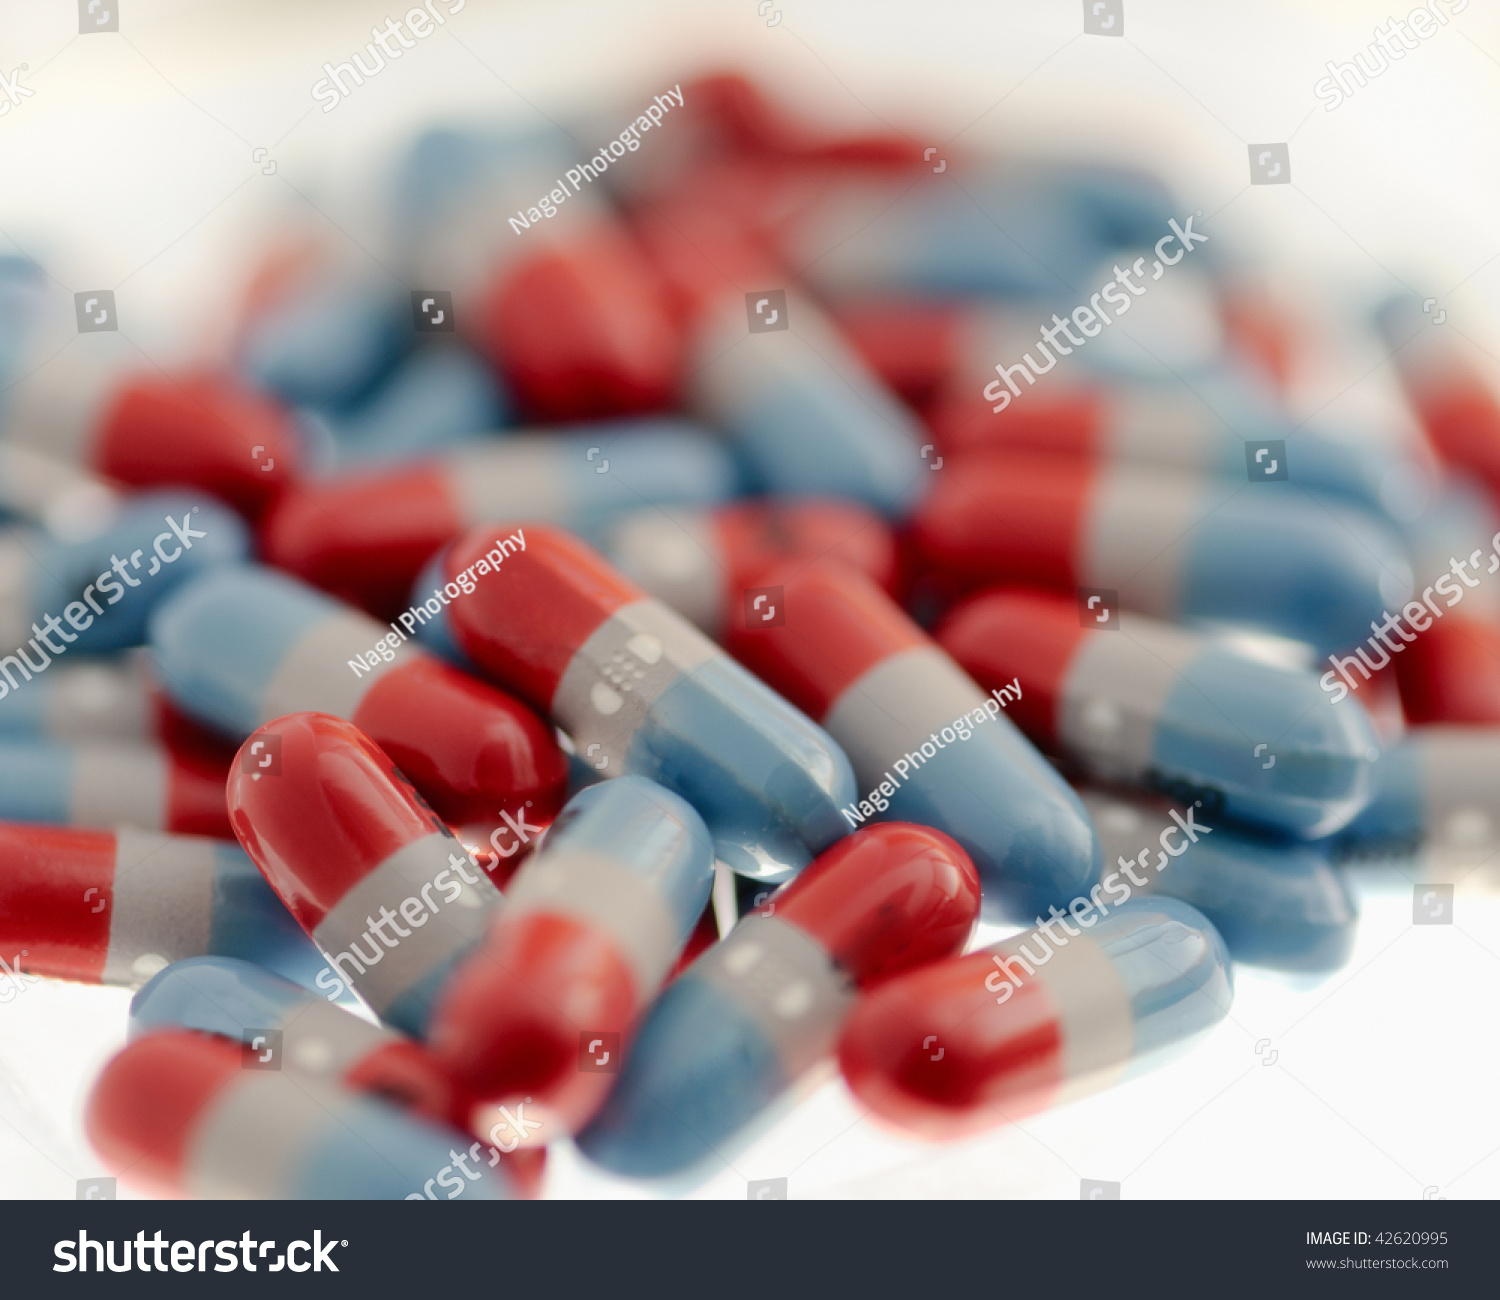 Albums 94+ Images what pills are red white and blue Full HD, 2k, 4k